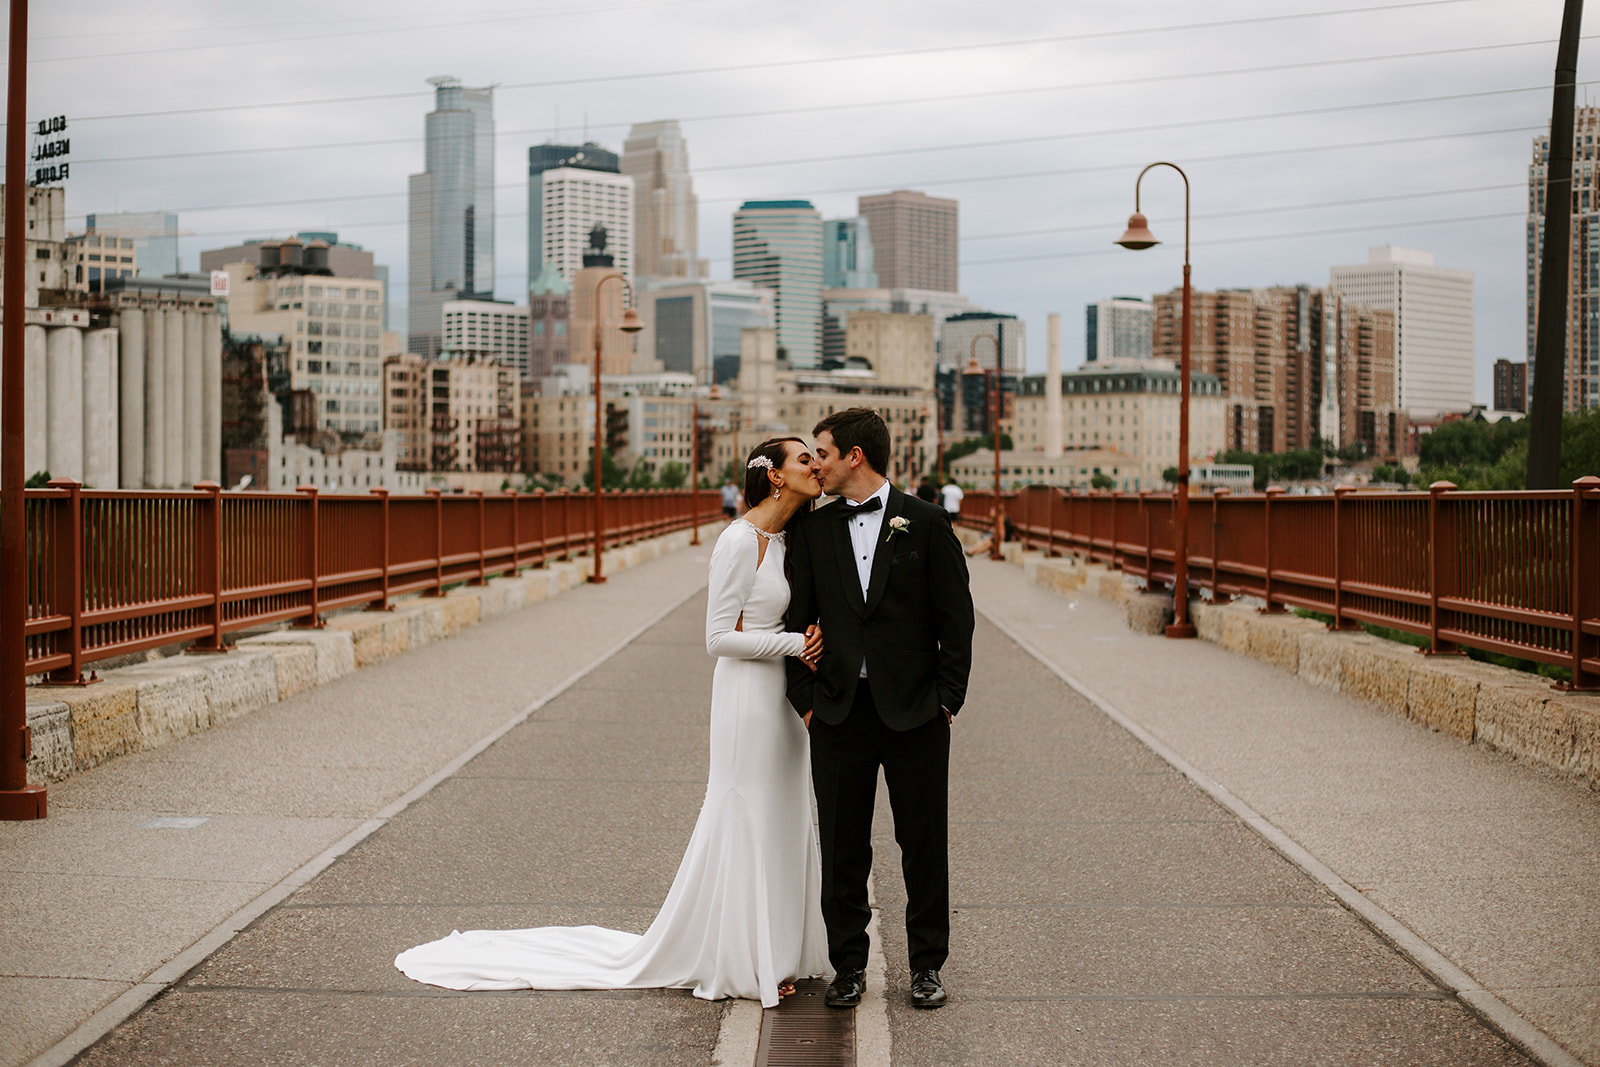 Bride and groom sharing a kiss on the Stone Arch Bridge in Minneaplis Minnesota during their wedding day